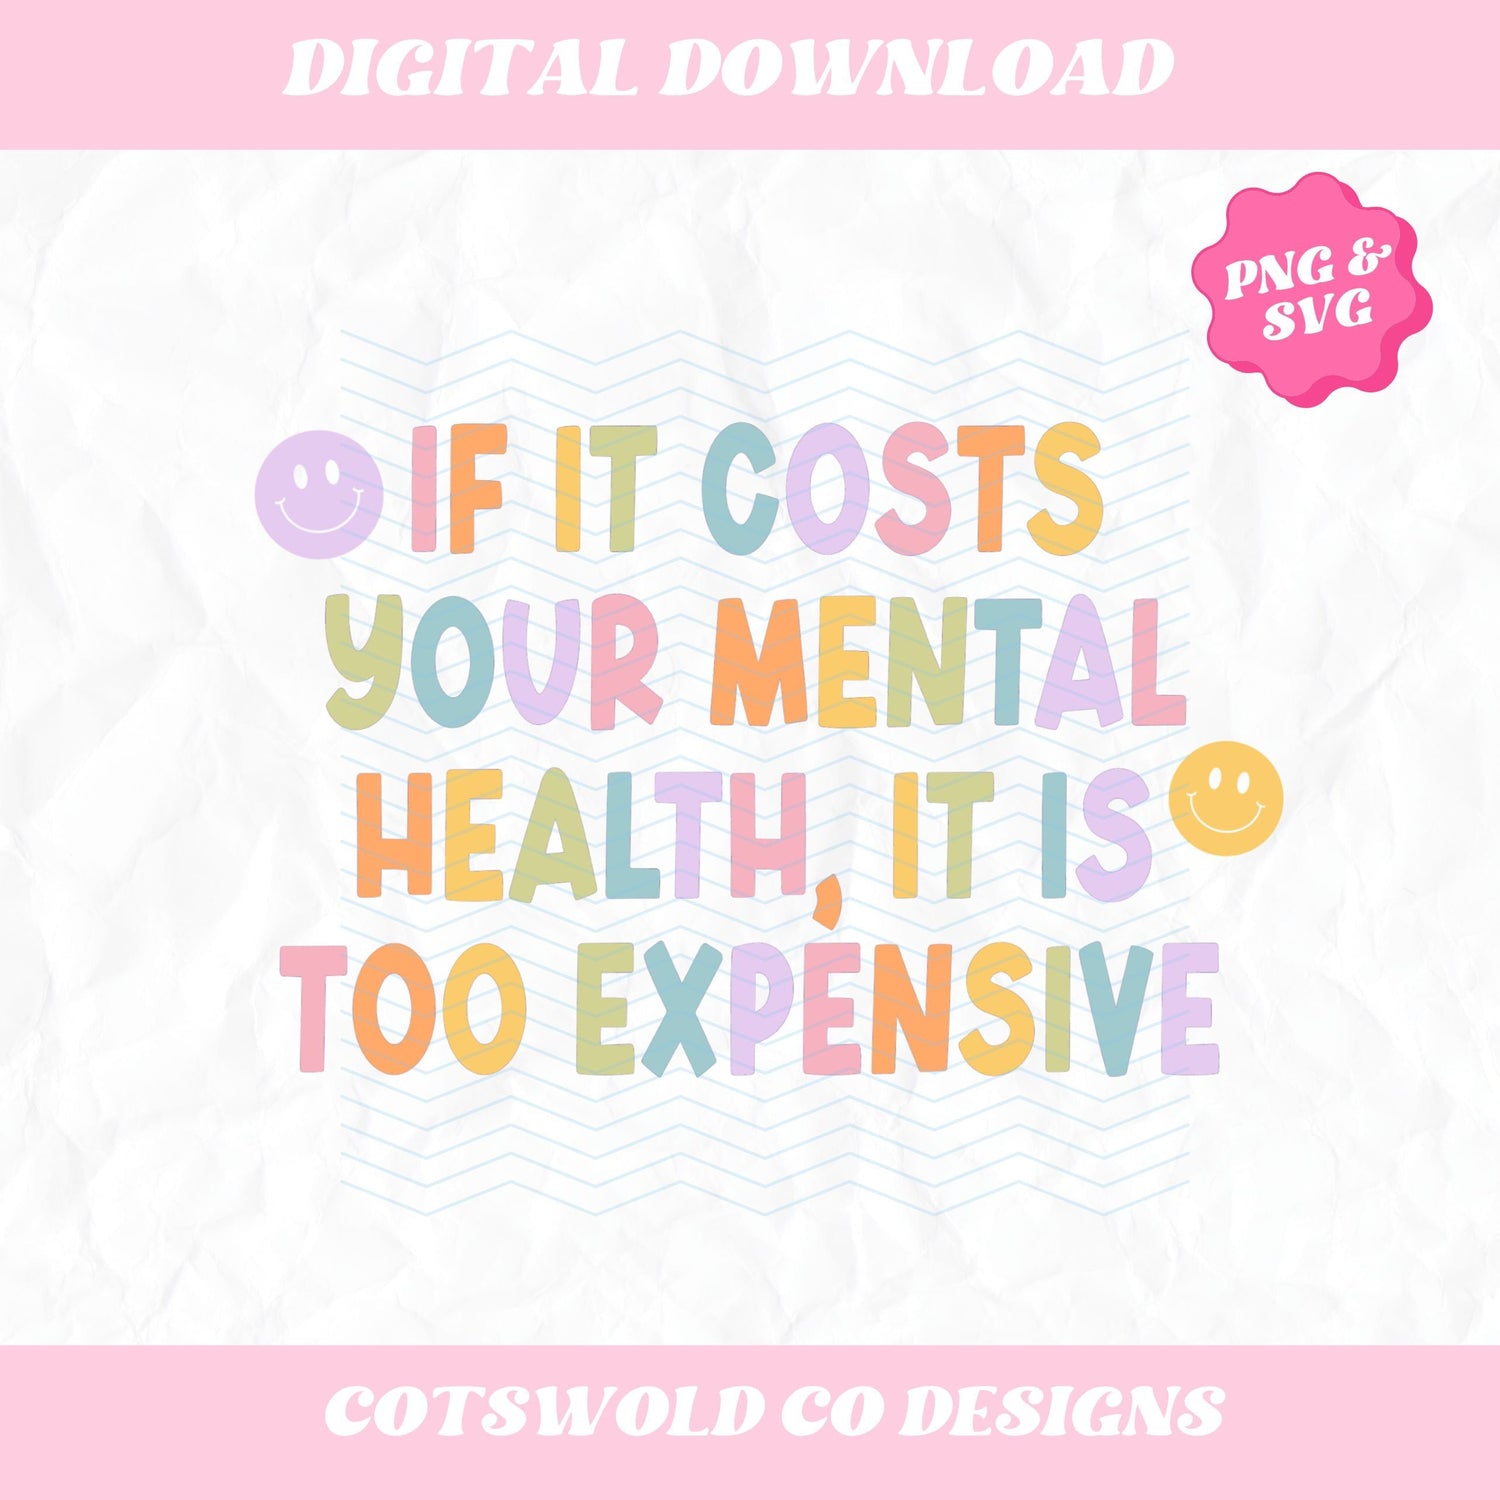 If It Costs Your Mental Health It's Too Expensive PNG SVG Design, Mental Health png svg designs, Retro Mental Health Design